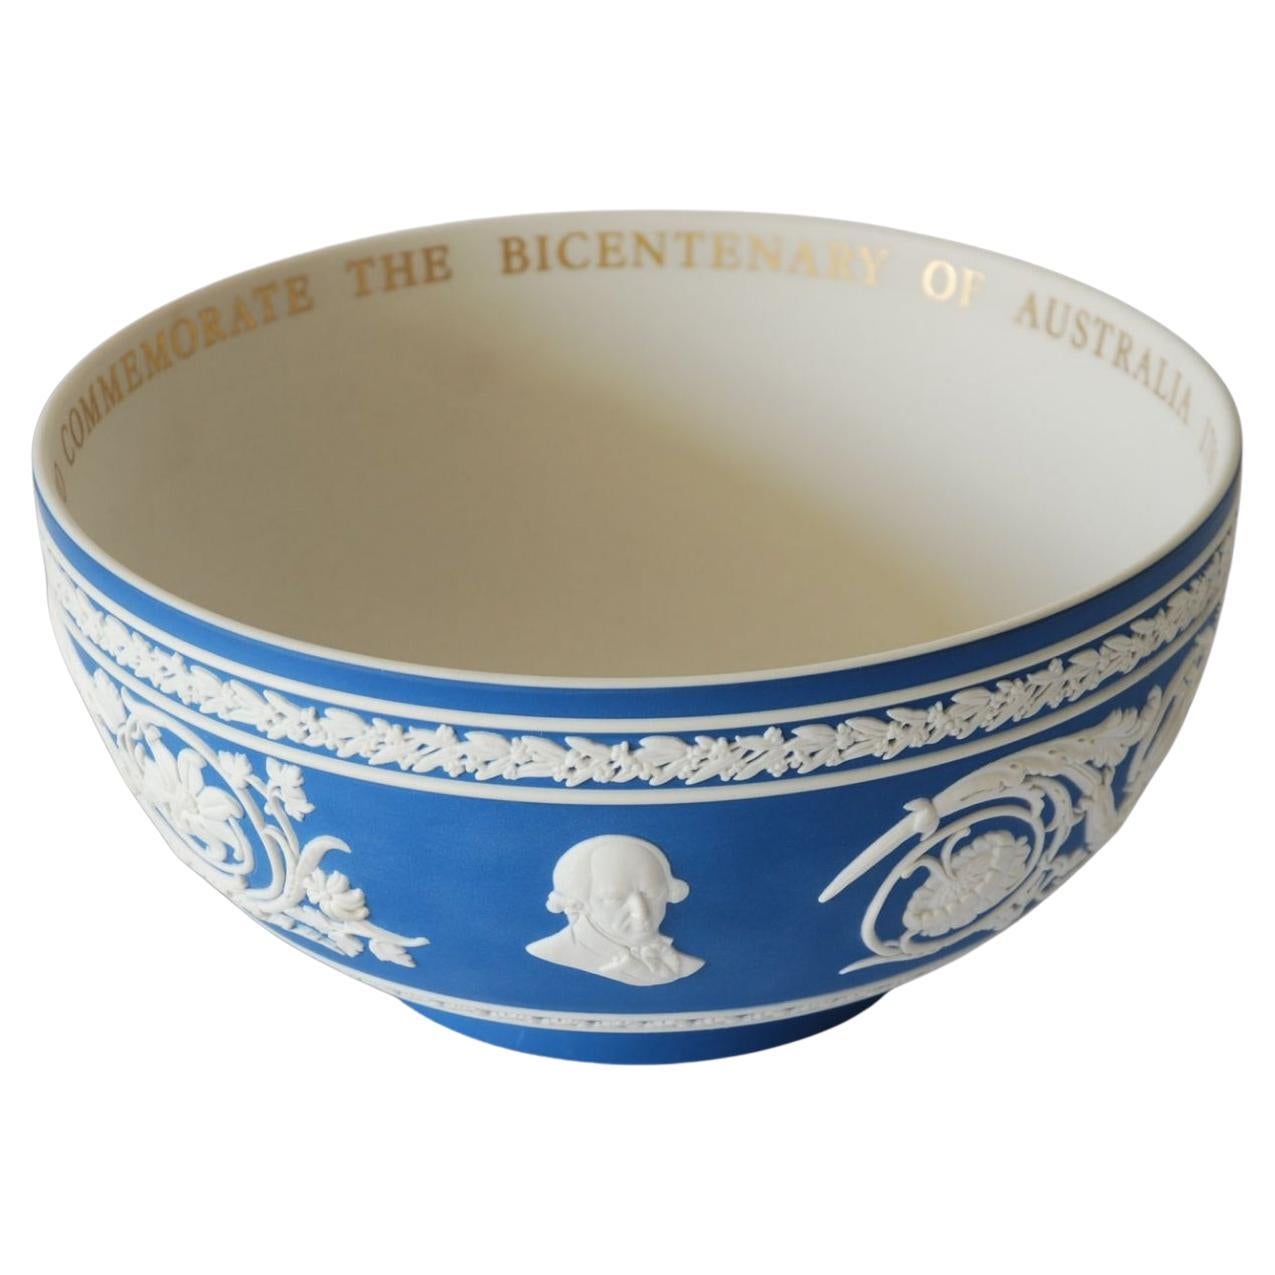 Australian Bicentenary Bowl, Wedgwood, circa 1988. Number 10 of 50 Made For Sale